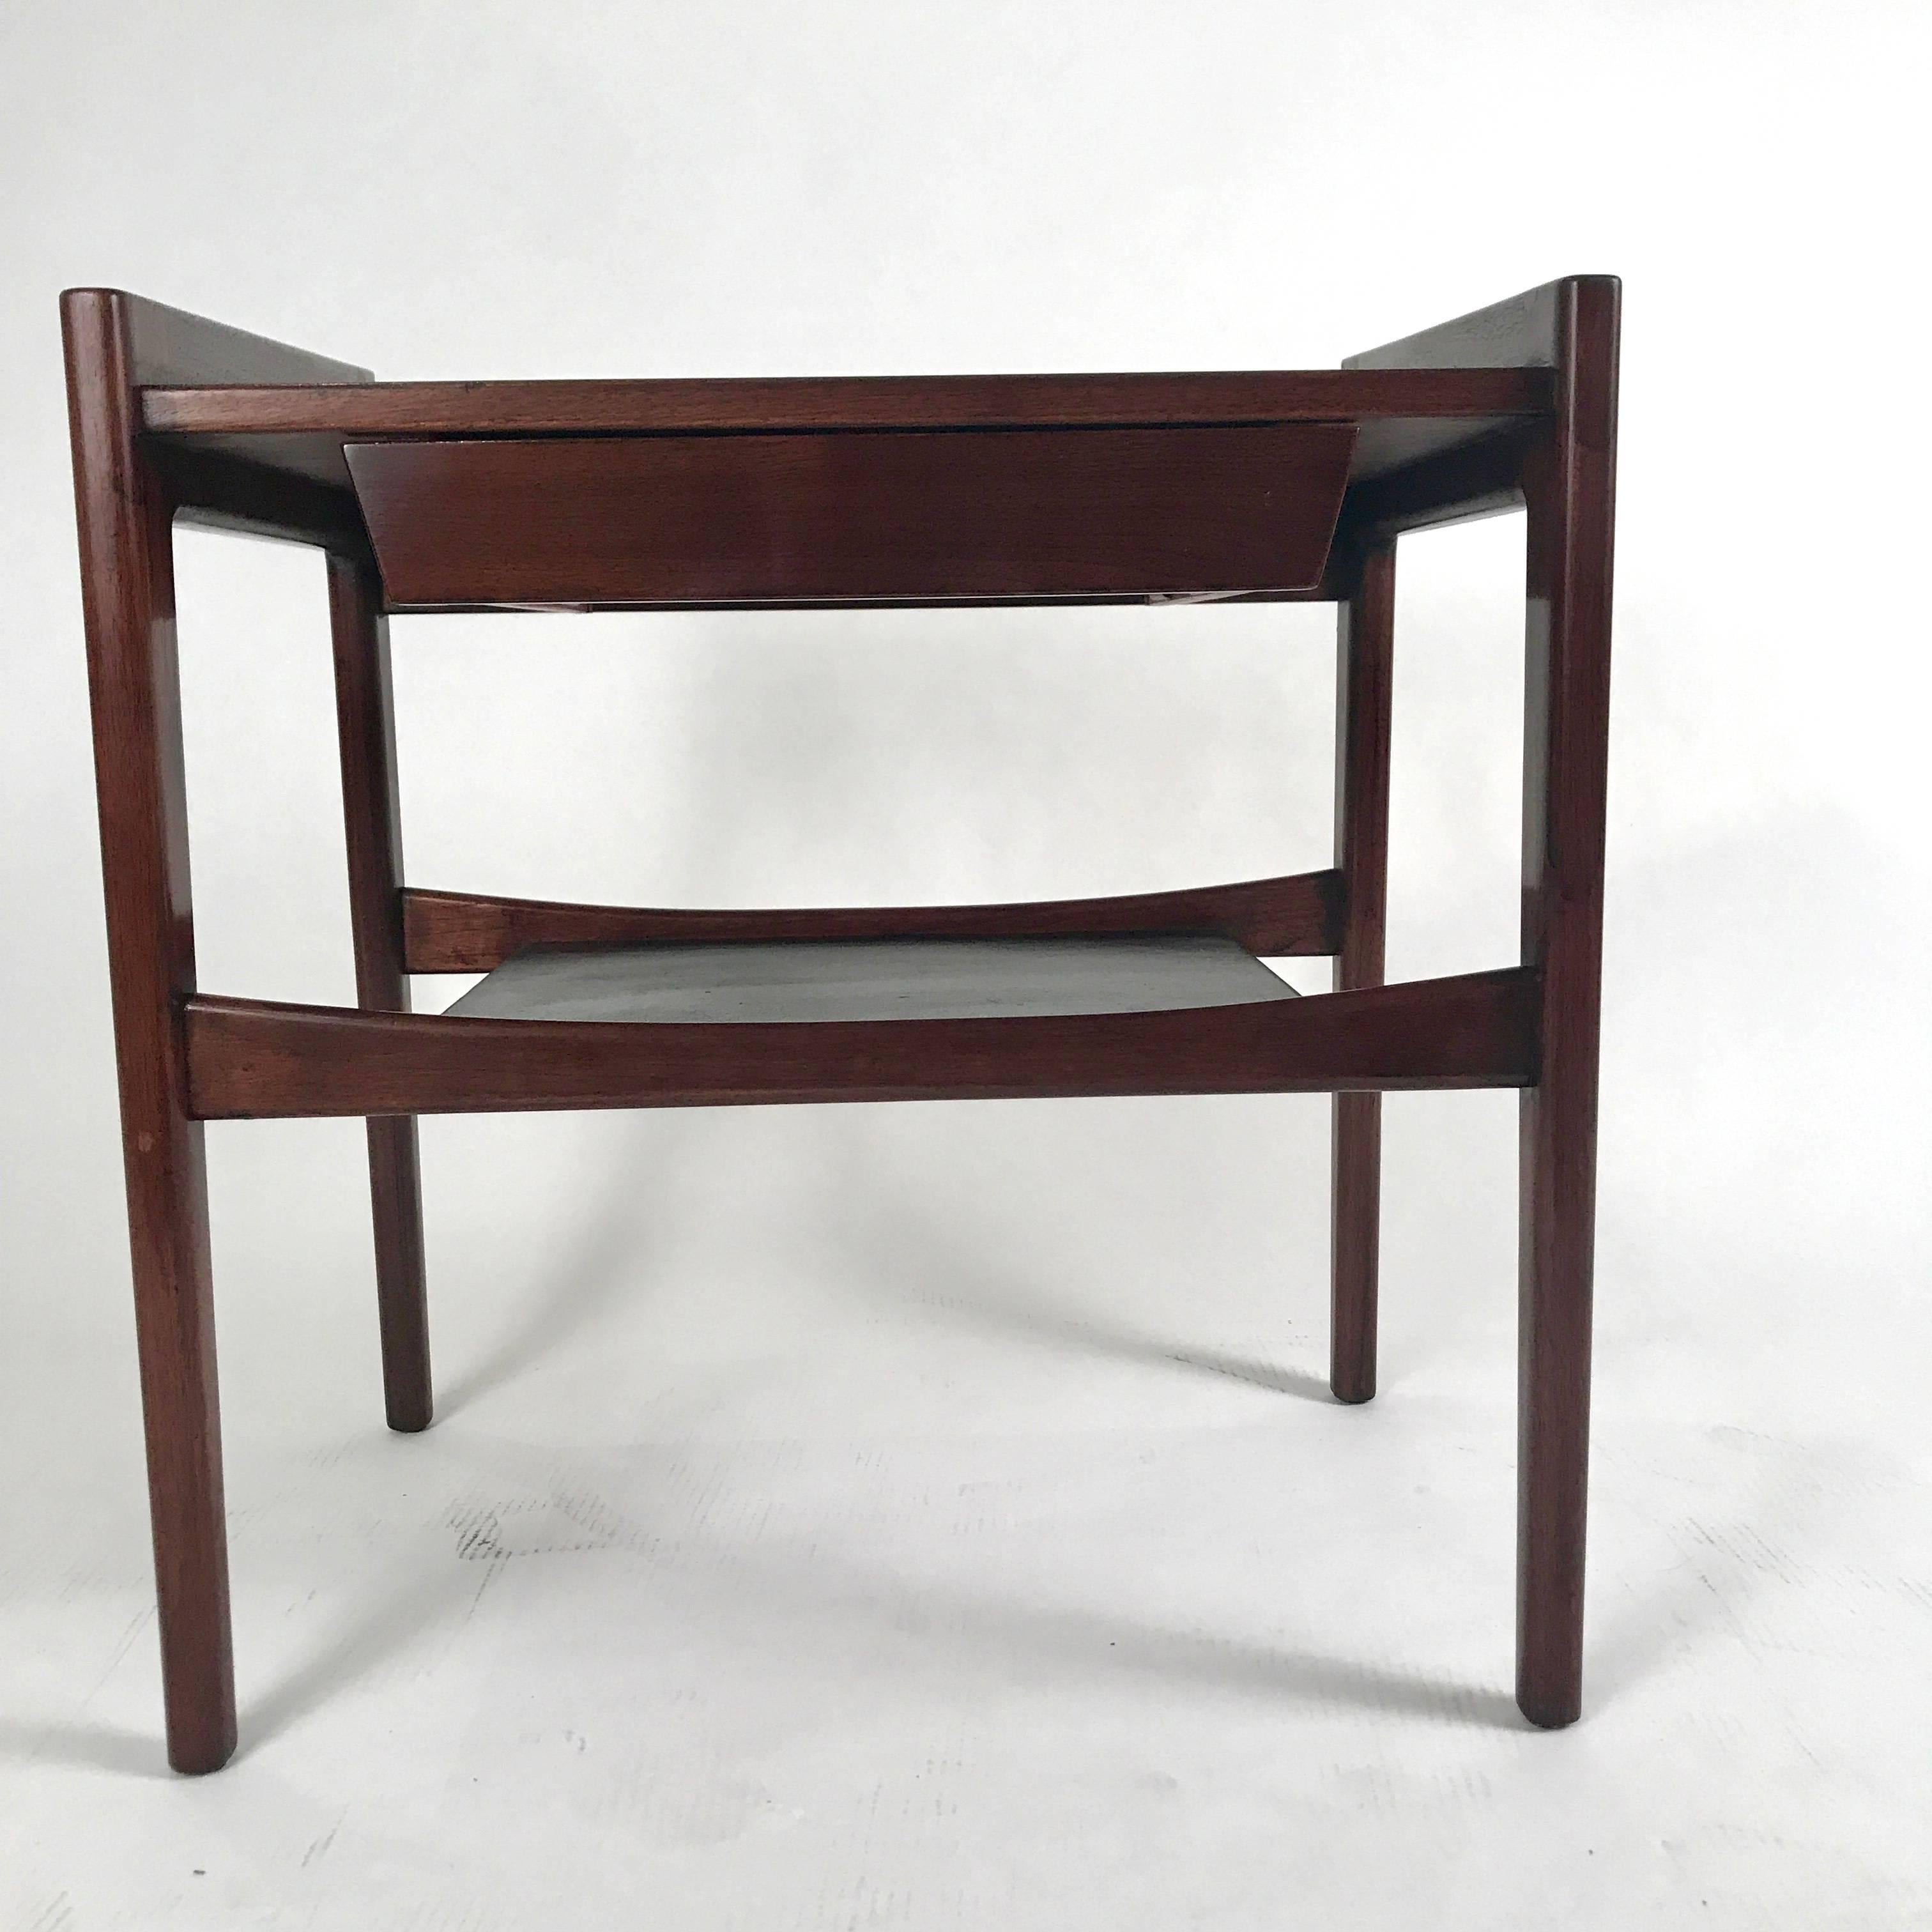 Rare pair of sculptural, seldom offered Jens Risom nightstands or end tables with a sleek single drawer and leather covered shelf. Can function as either bedside or sofa side tables. Gorgeous lines!